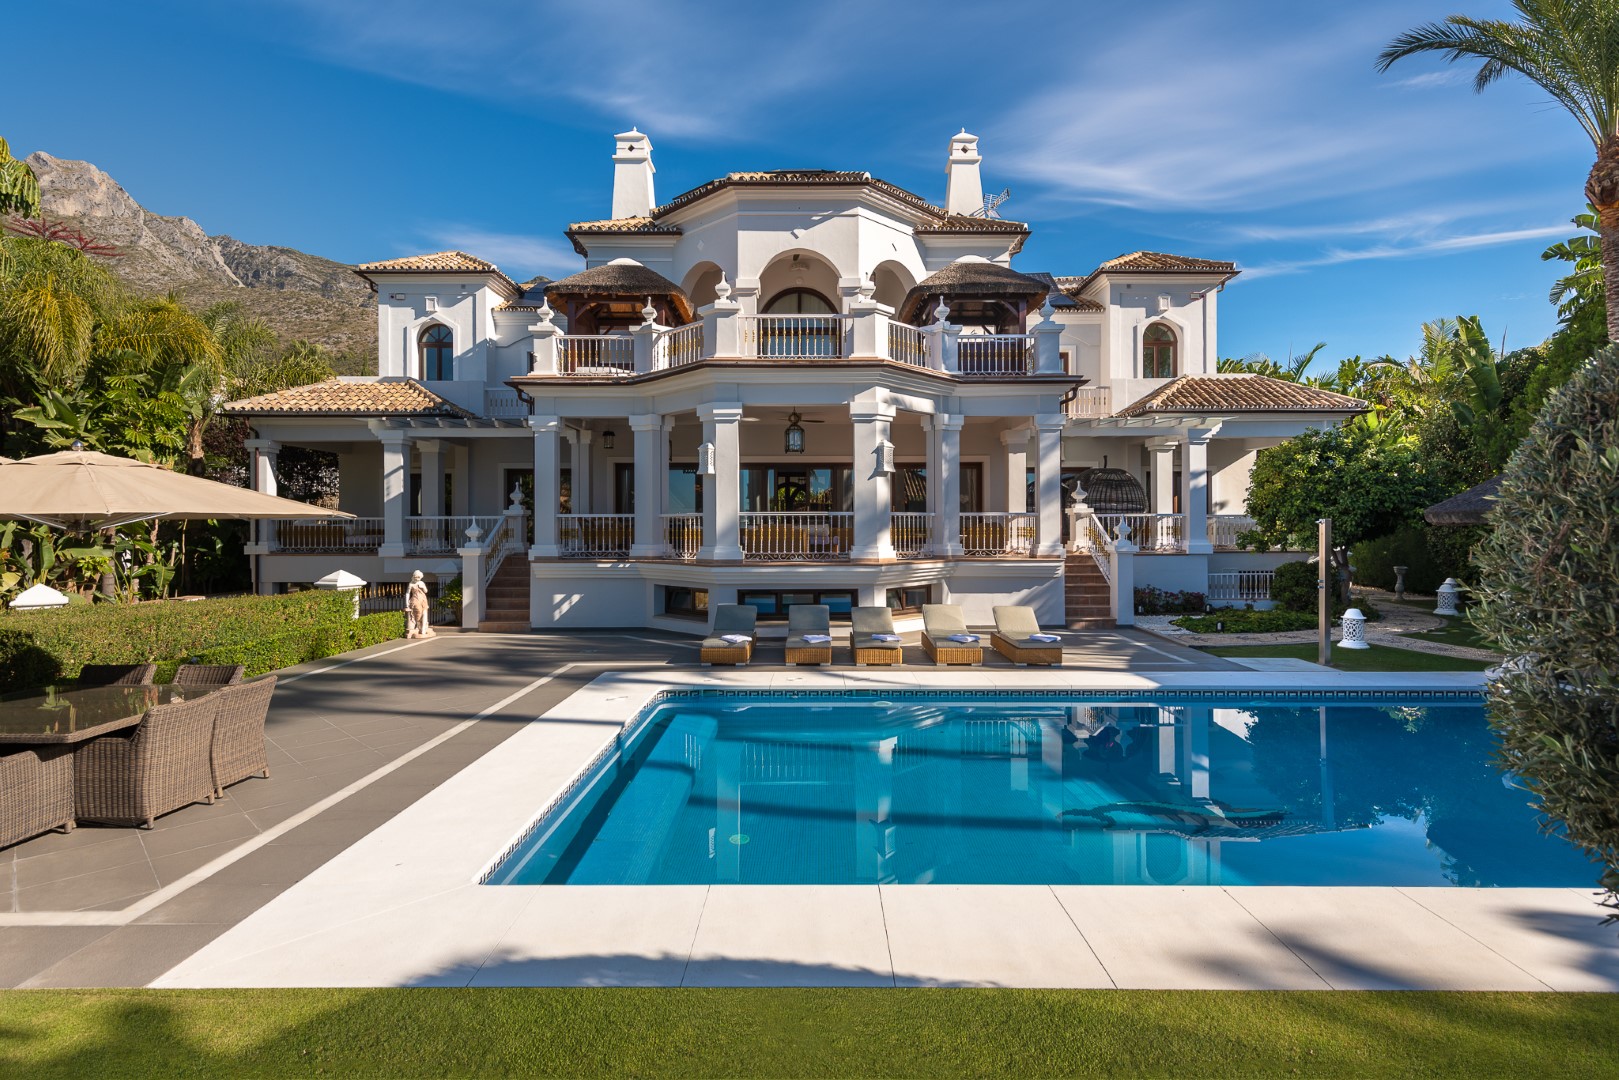 Property Image 1 - Palatial villa with indoor spa and heated pool